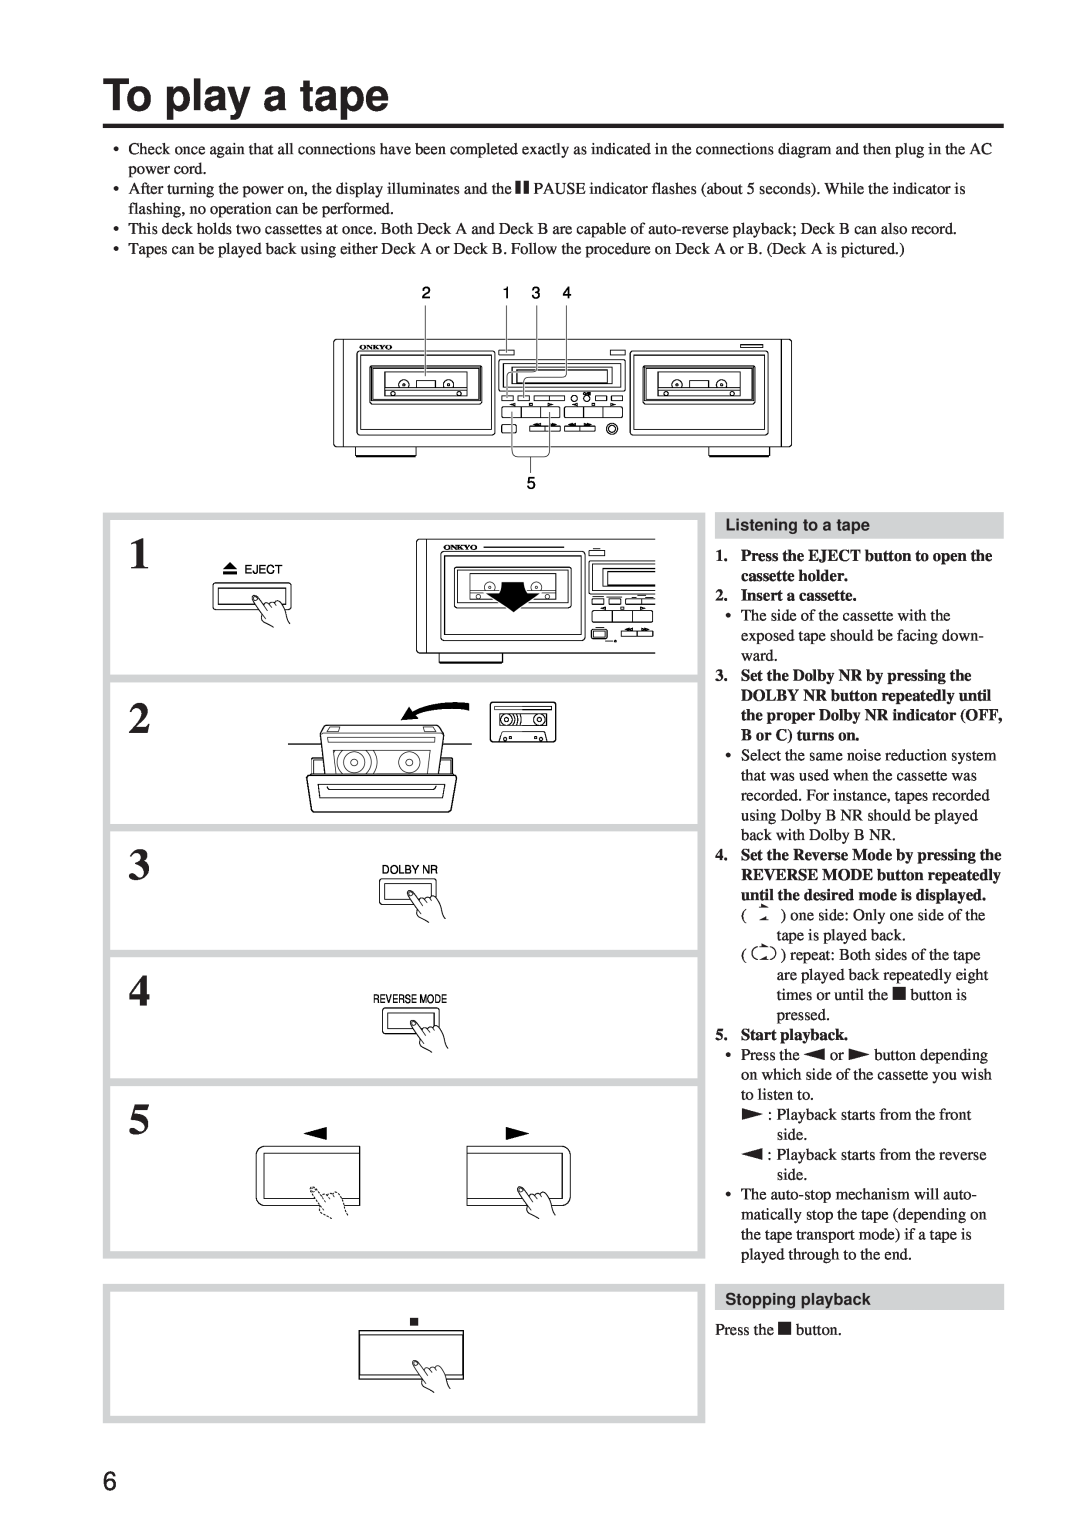 Onkyo TA-RW244/144 instruction manual To play a tape, Listening to a tape, Stopping playback 